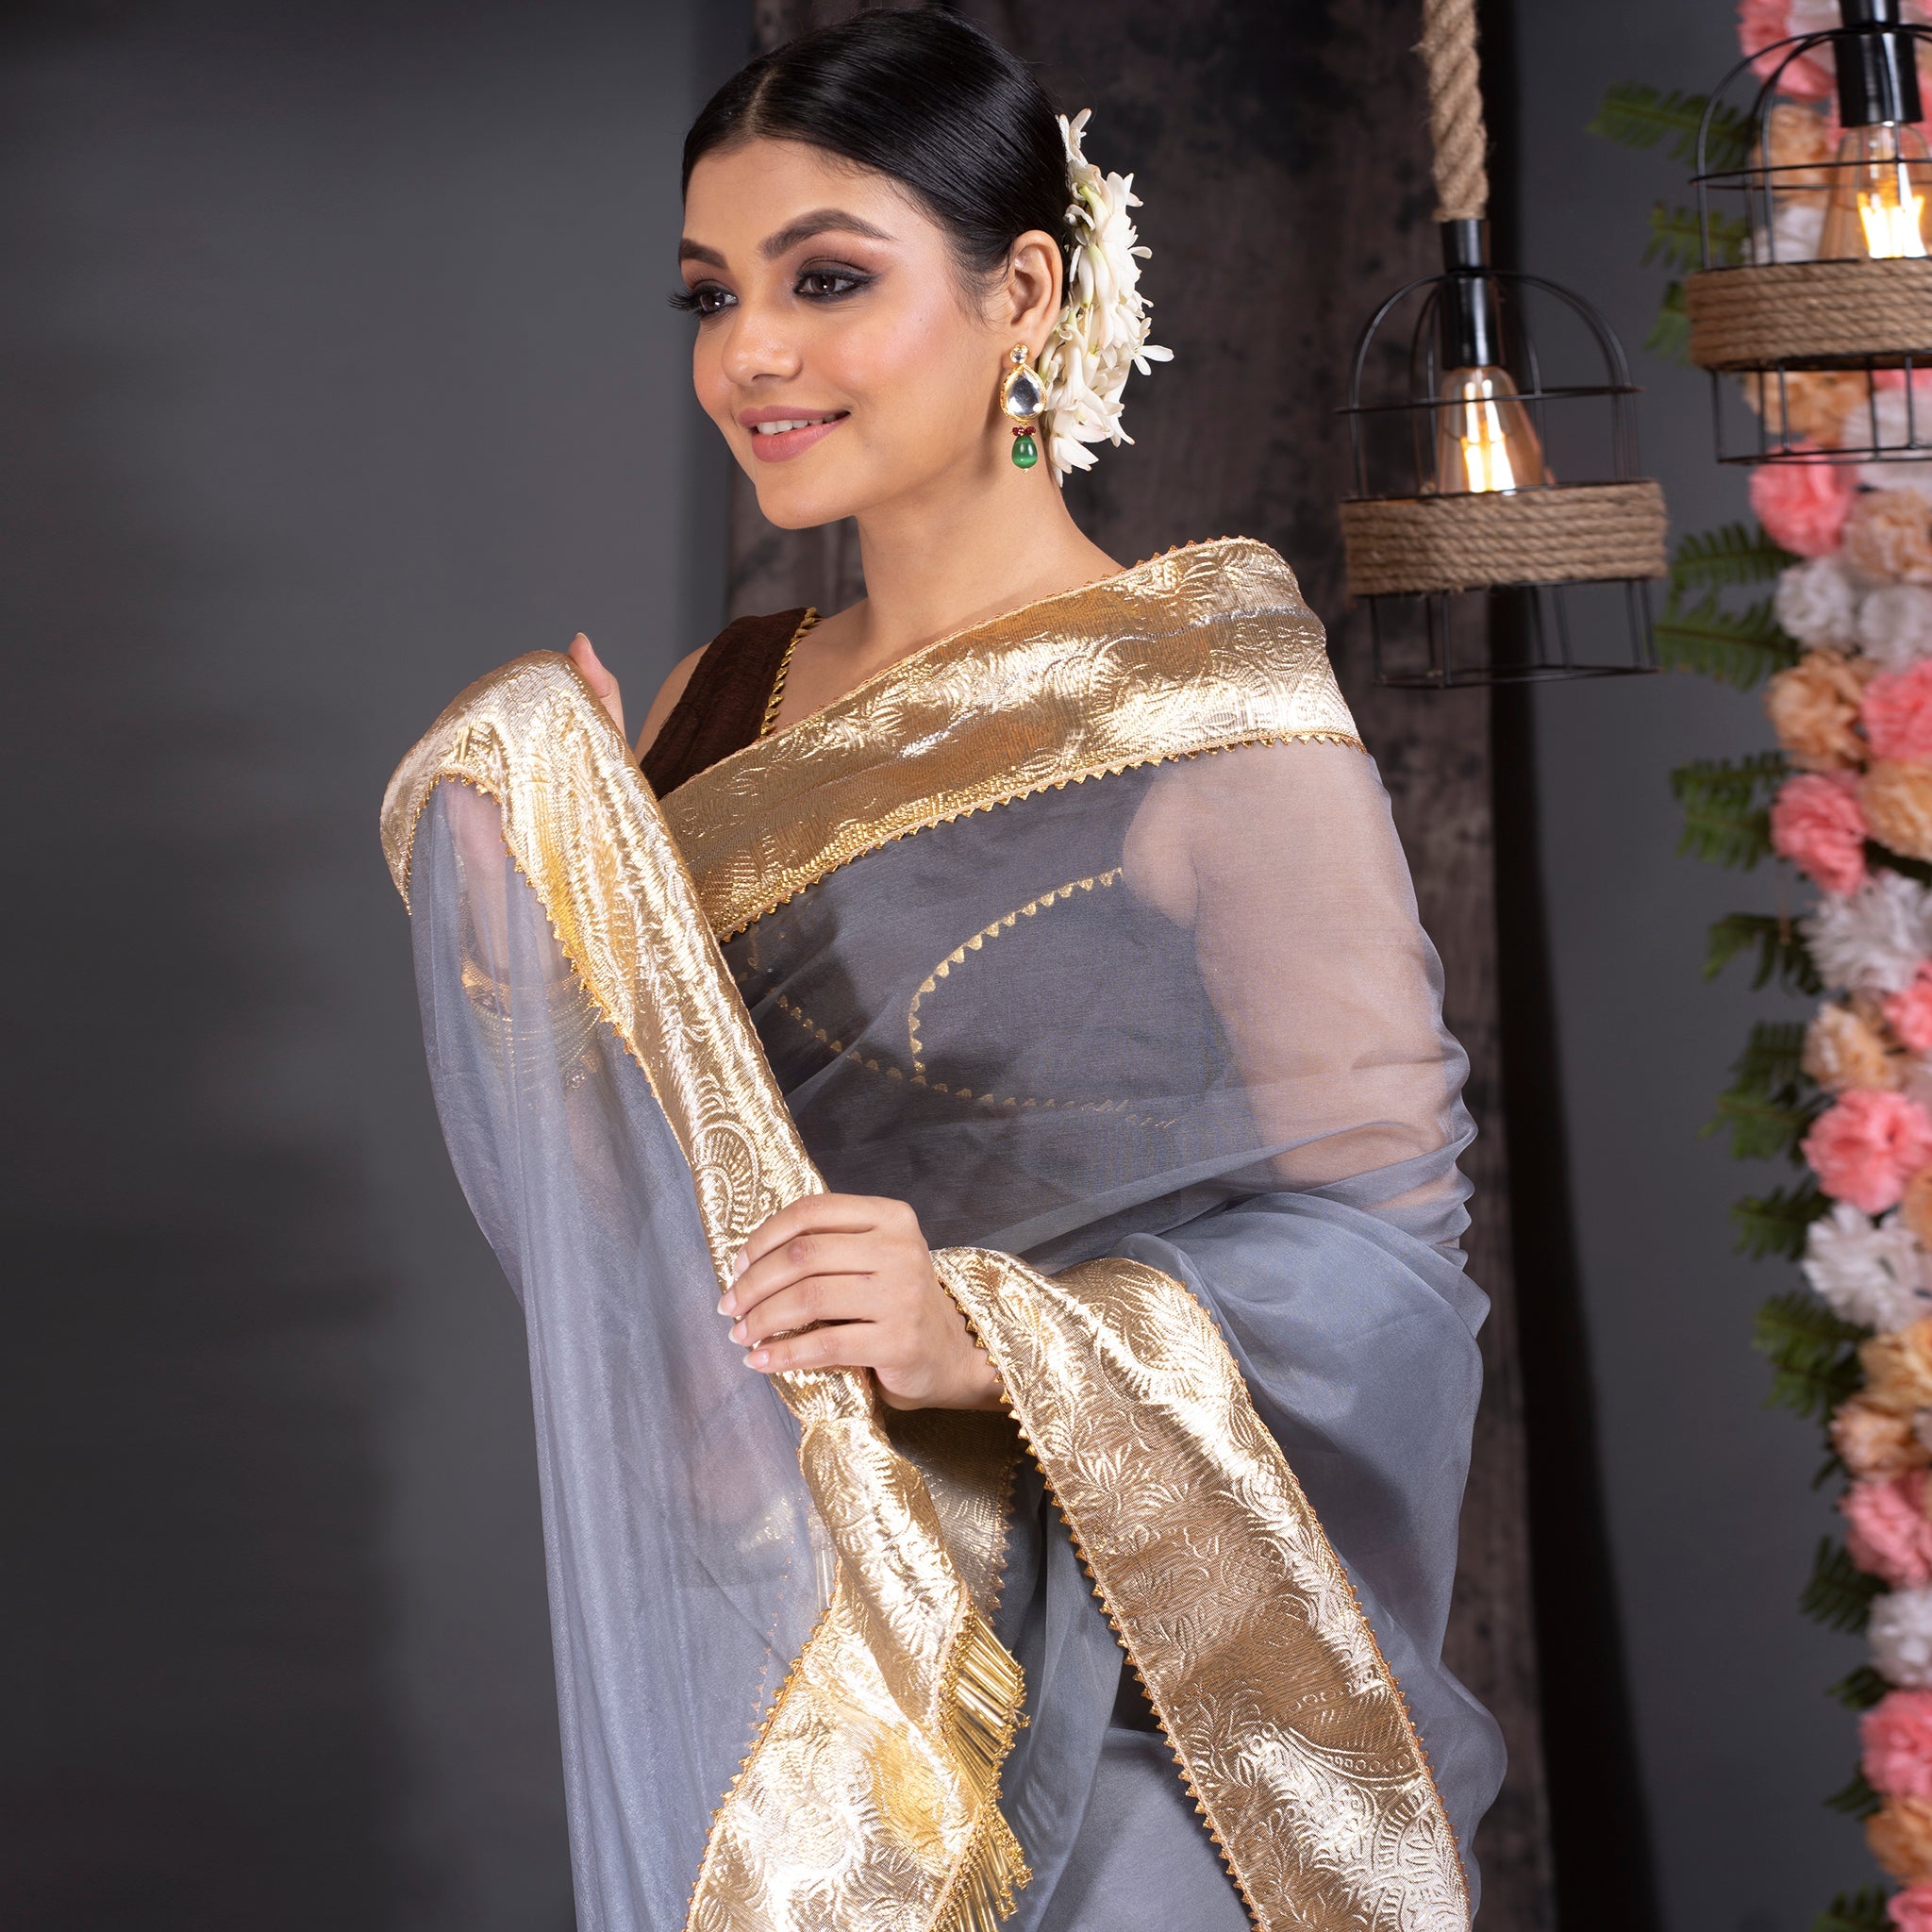 Women's Steel Grey Organza Saree With Gold Gota Border And  Fringe Lace - Boveee